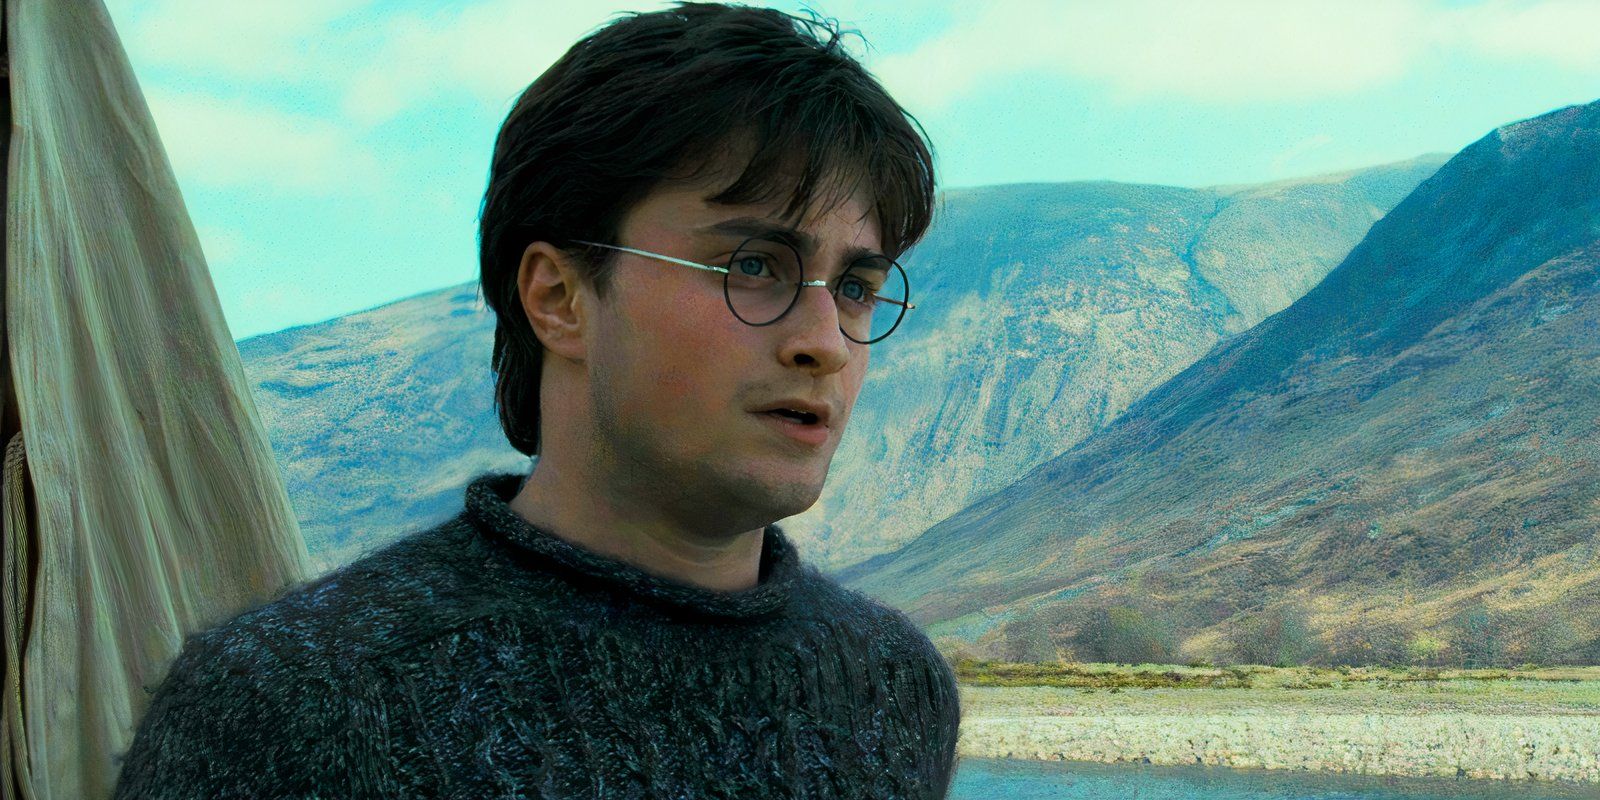 Daniel Radcliffe reveals which book he is most looking forward to in the Harry Potter TV series adaptation